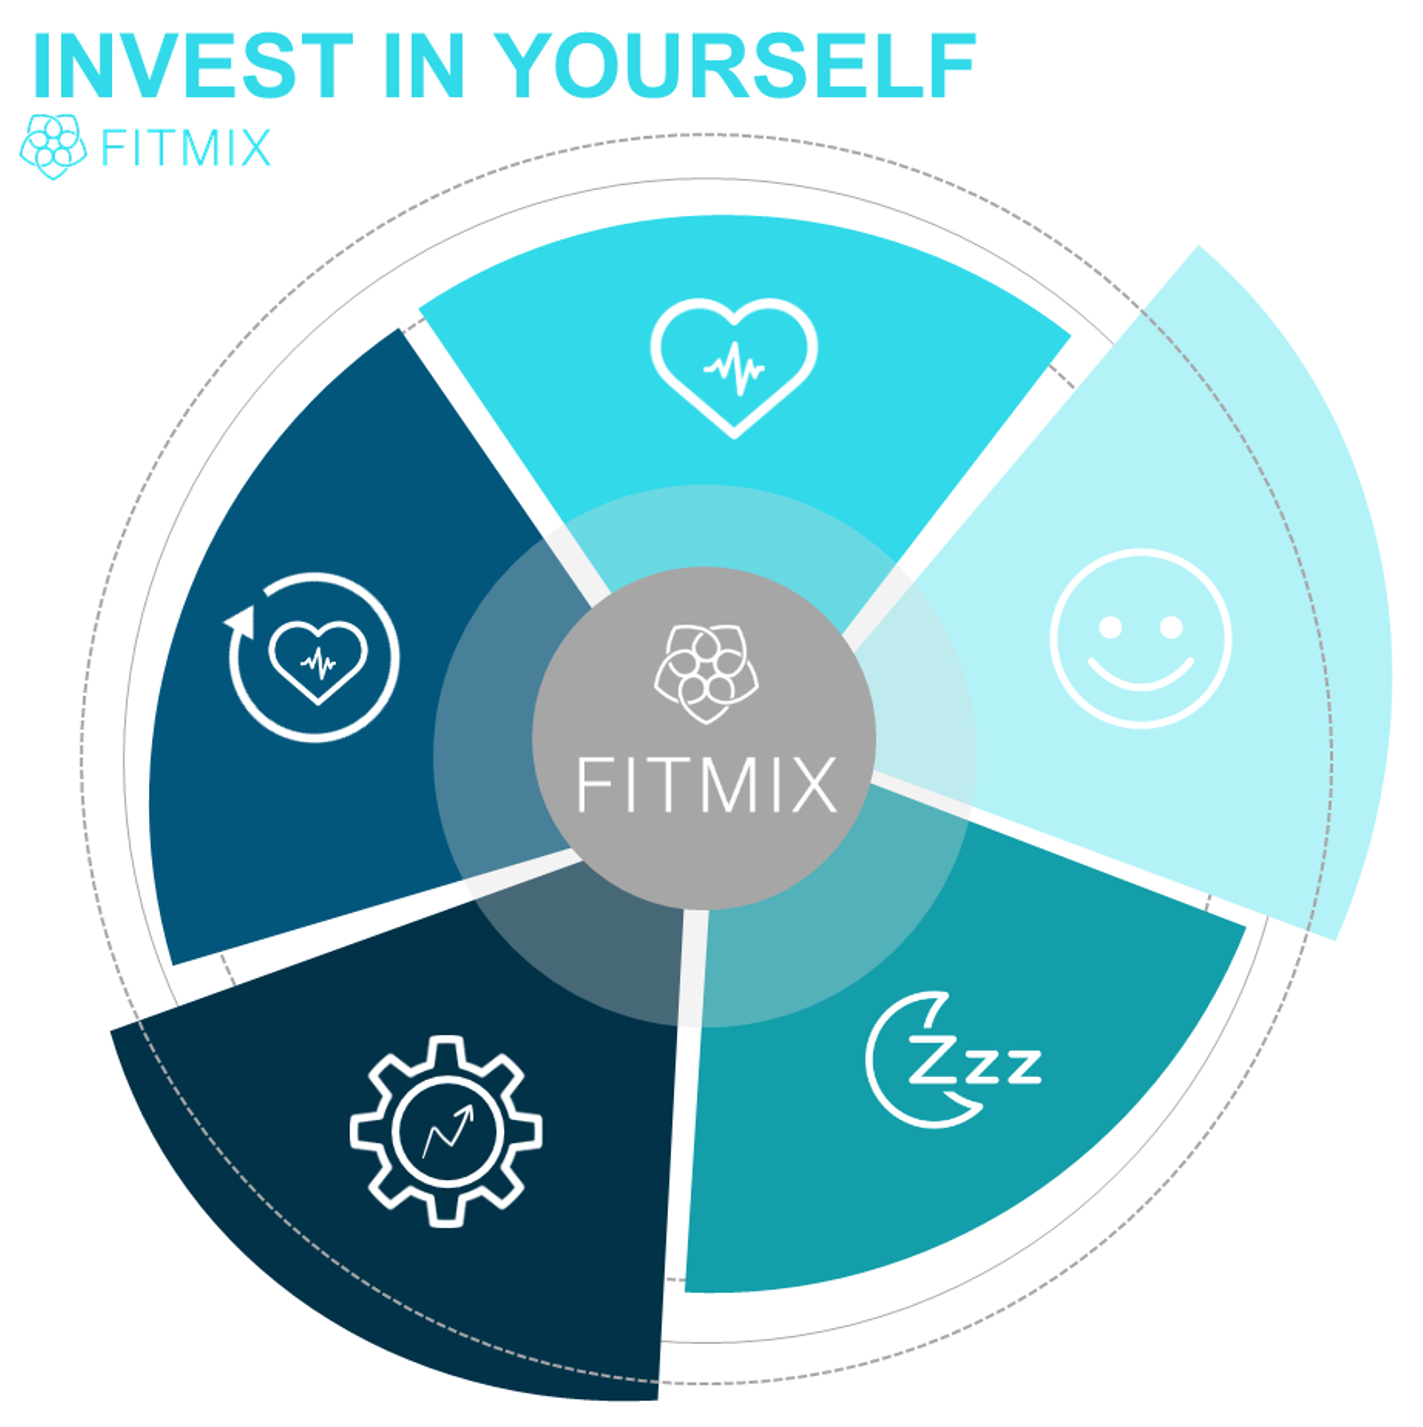 https://fitmixonline.com/assets/blogs_images/1586783227-Invest_in_Yourself.png